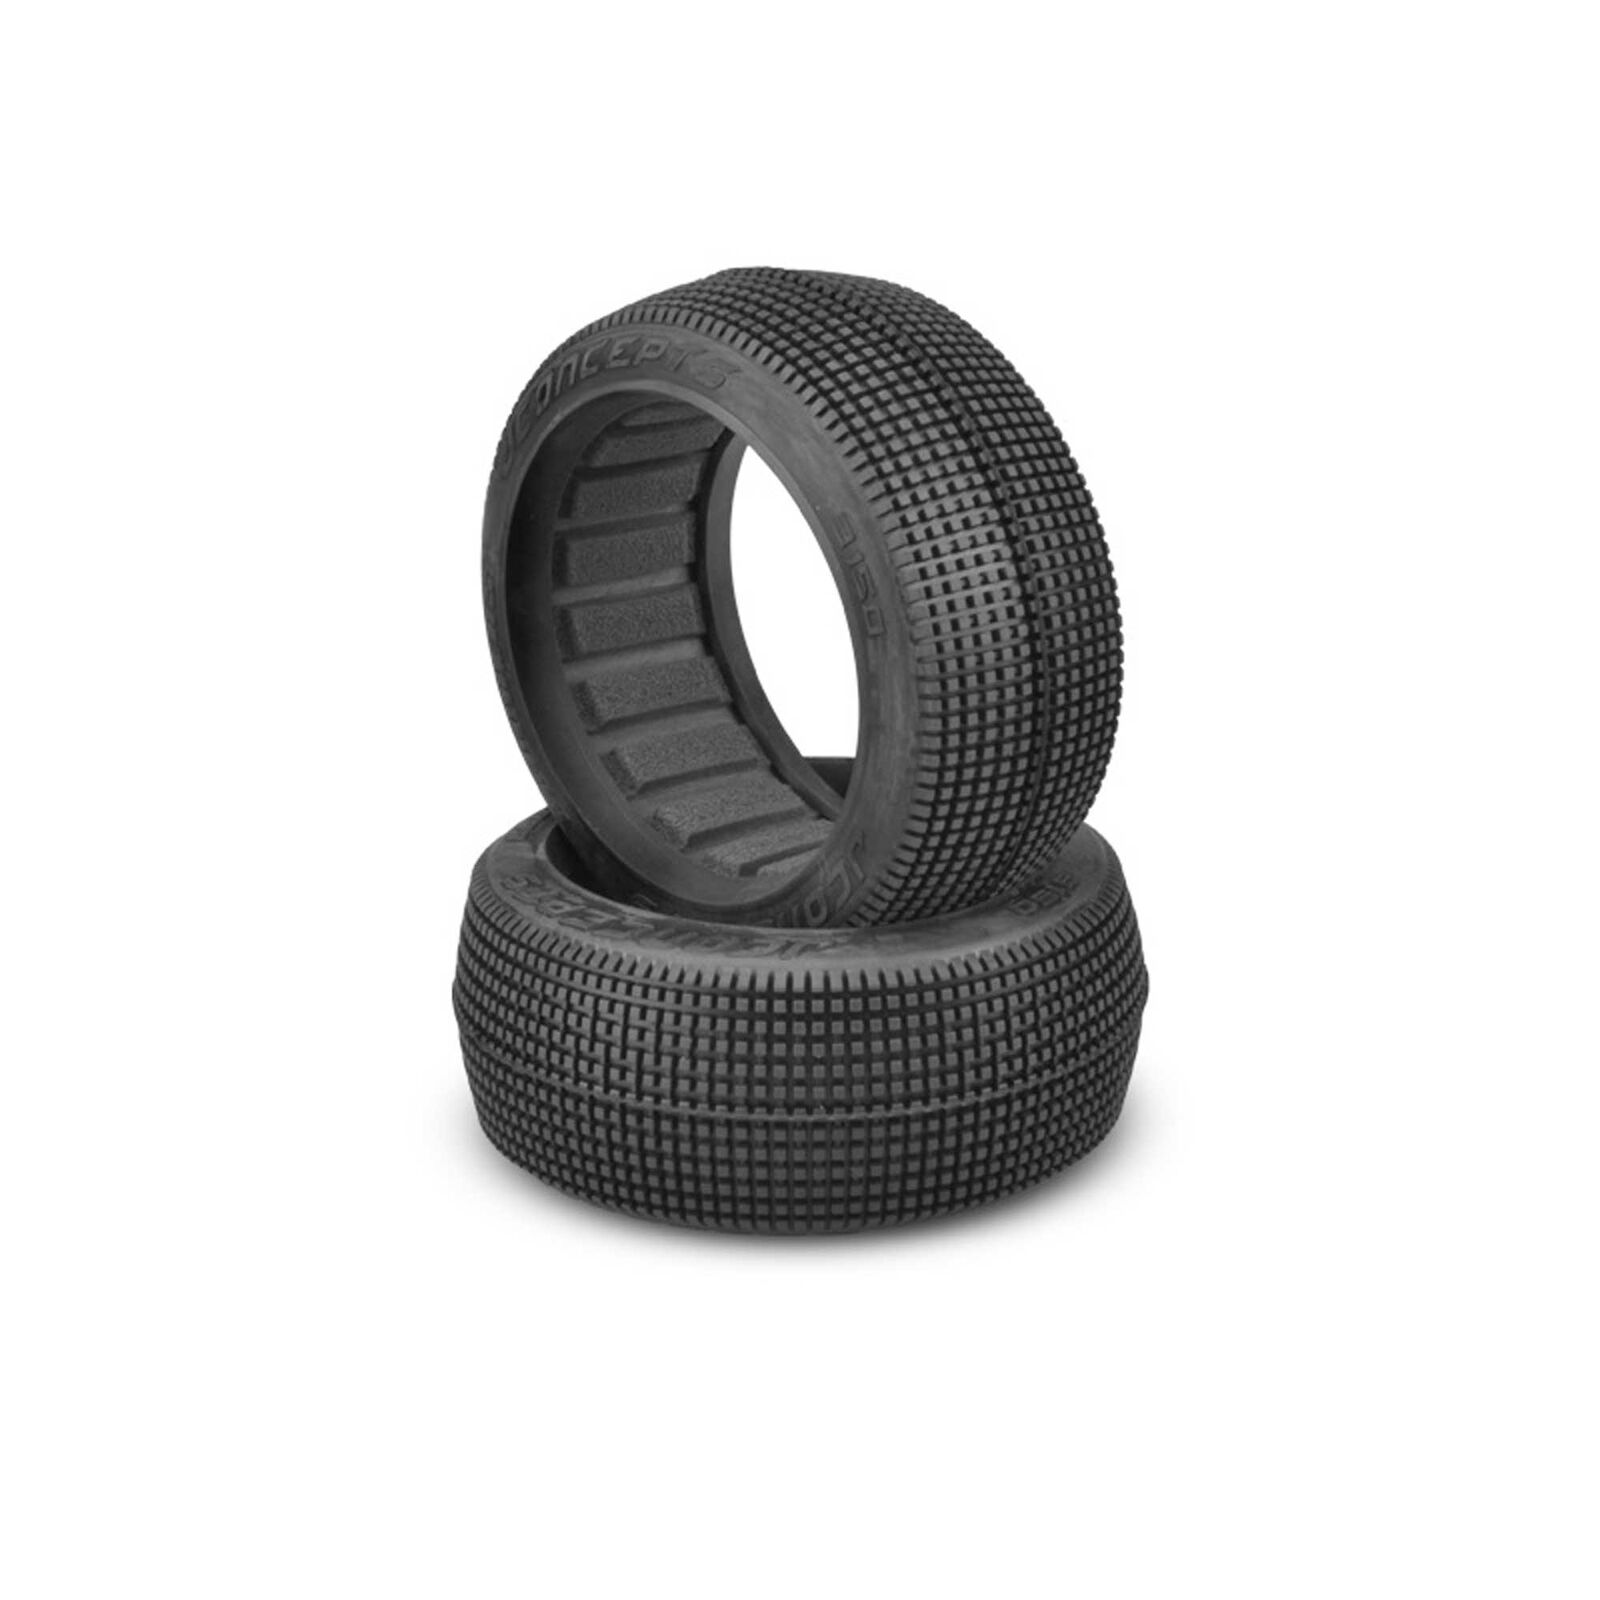 1/8 Blockers 83mm Buggy Tires and Inserts, Green Compound (2)